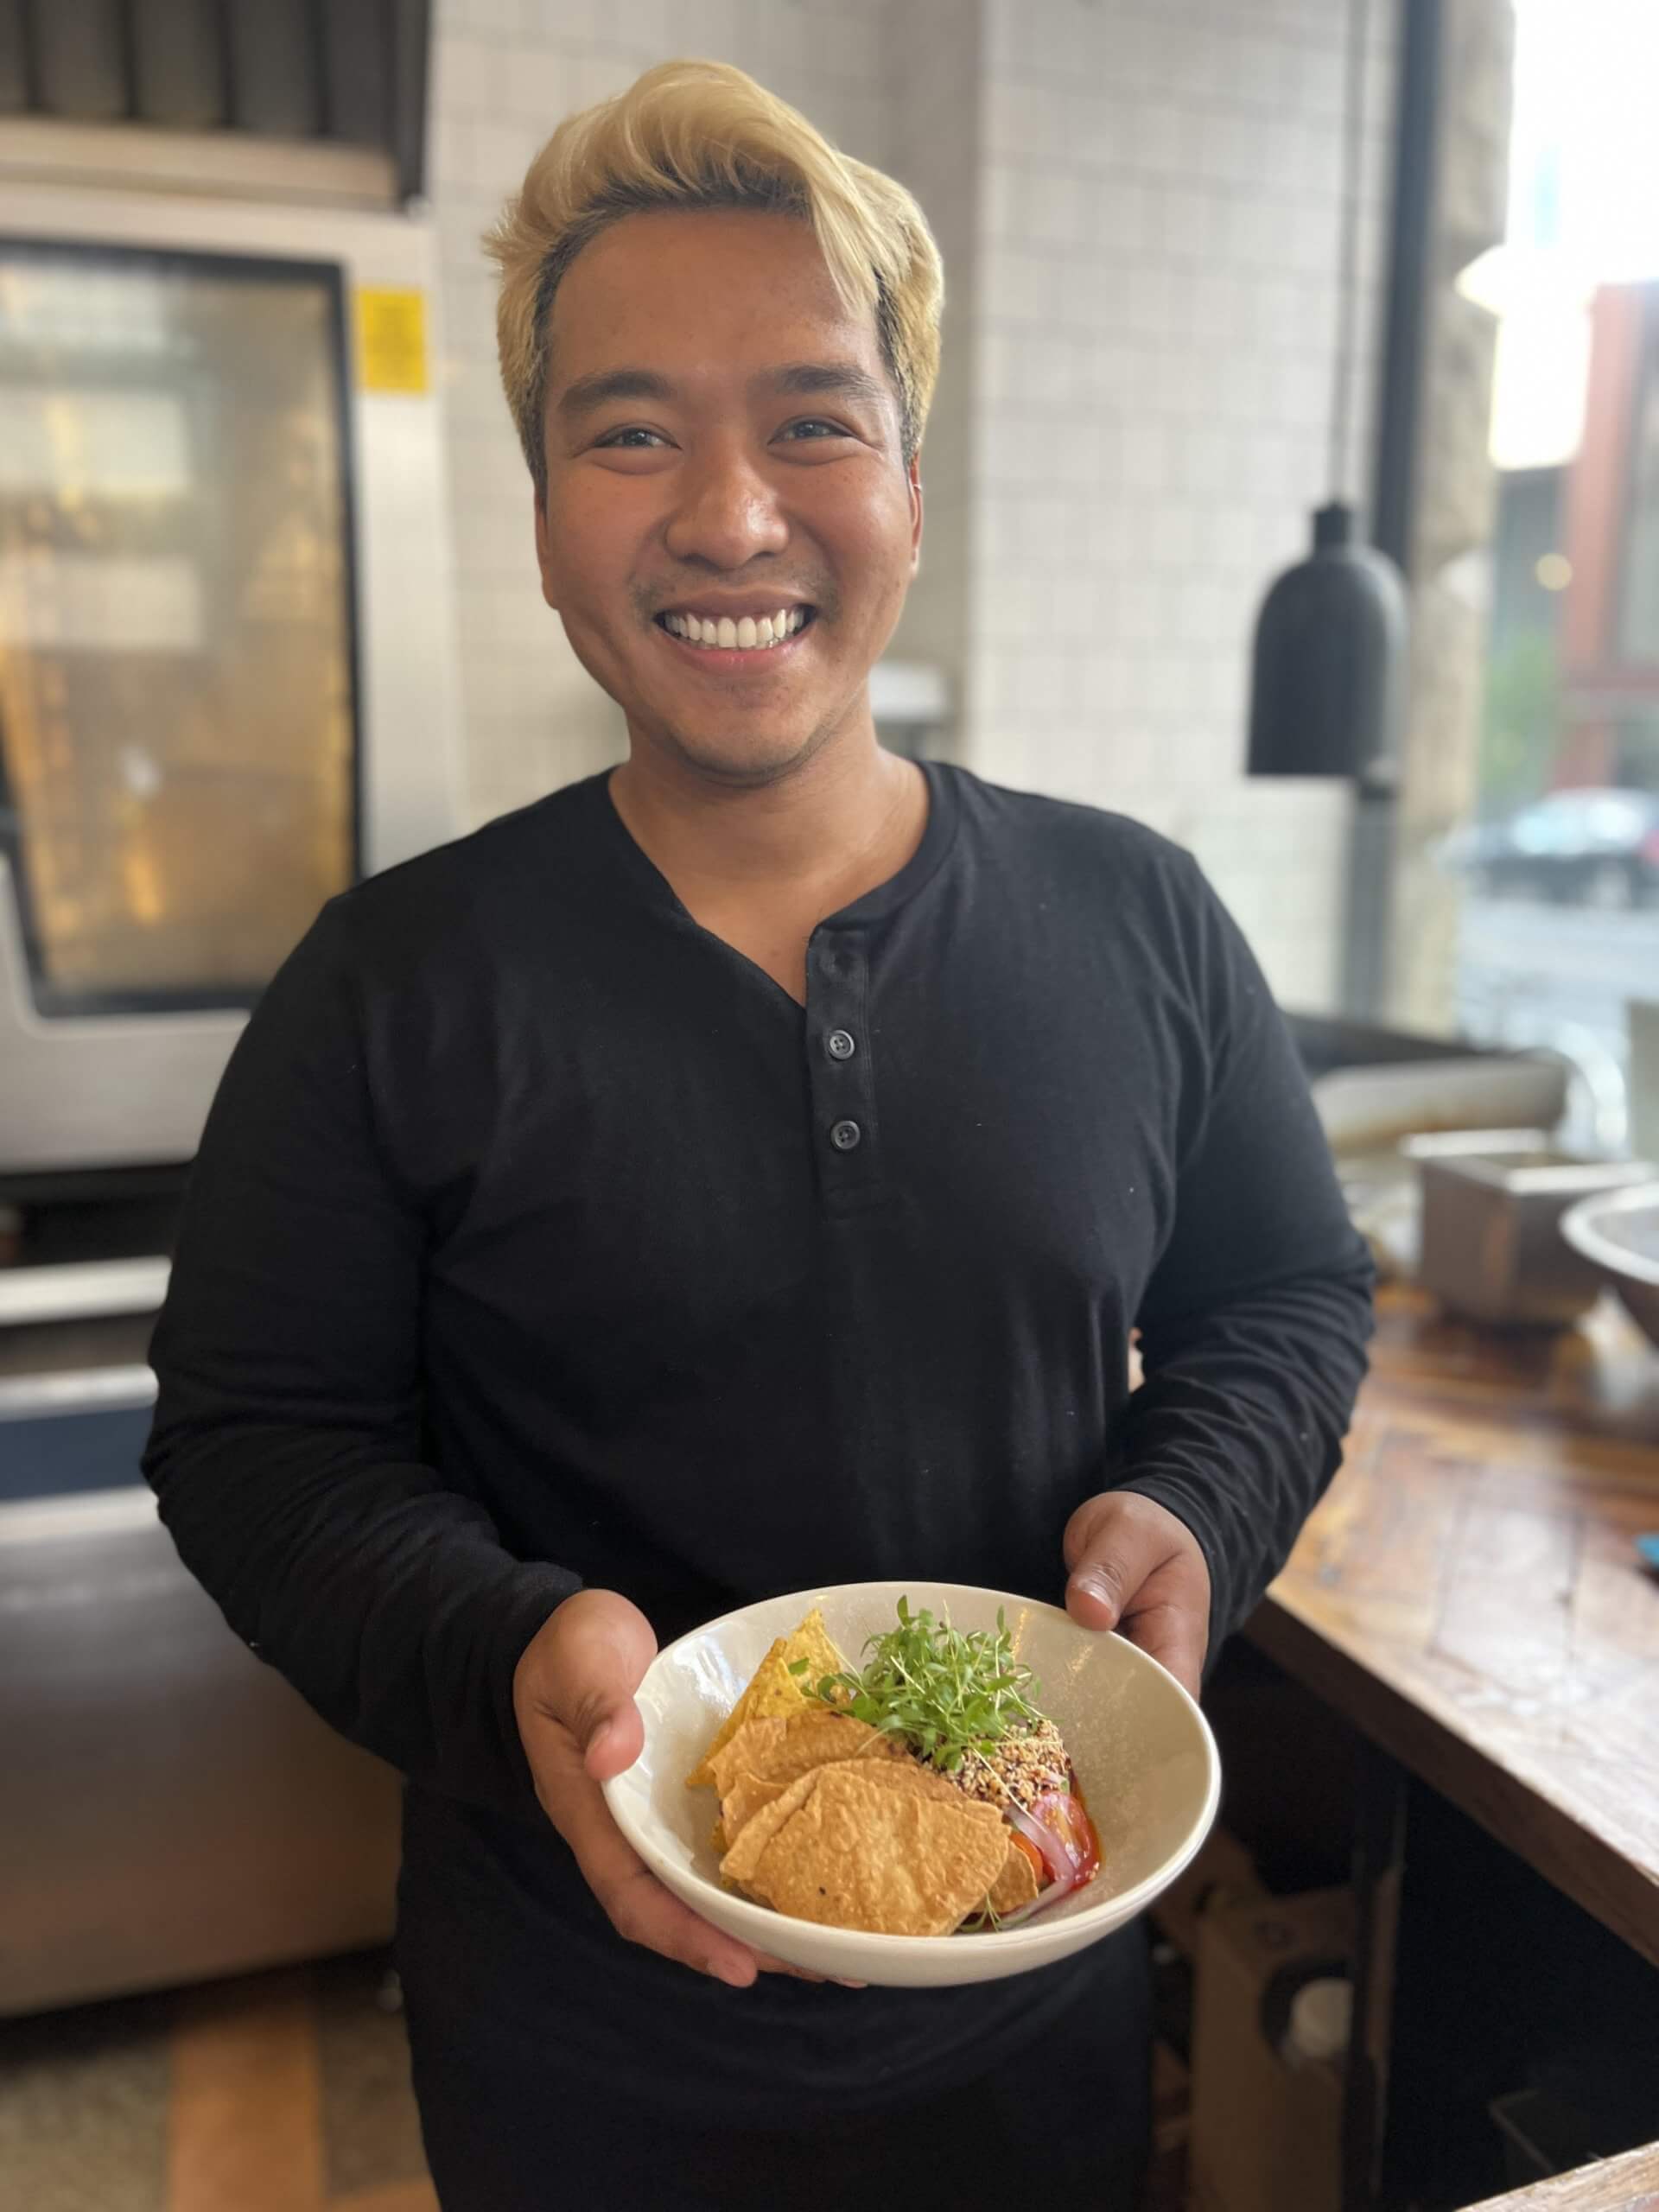 A man smiles while holding a bowl of food